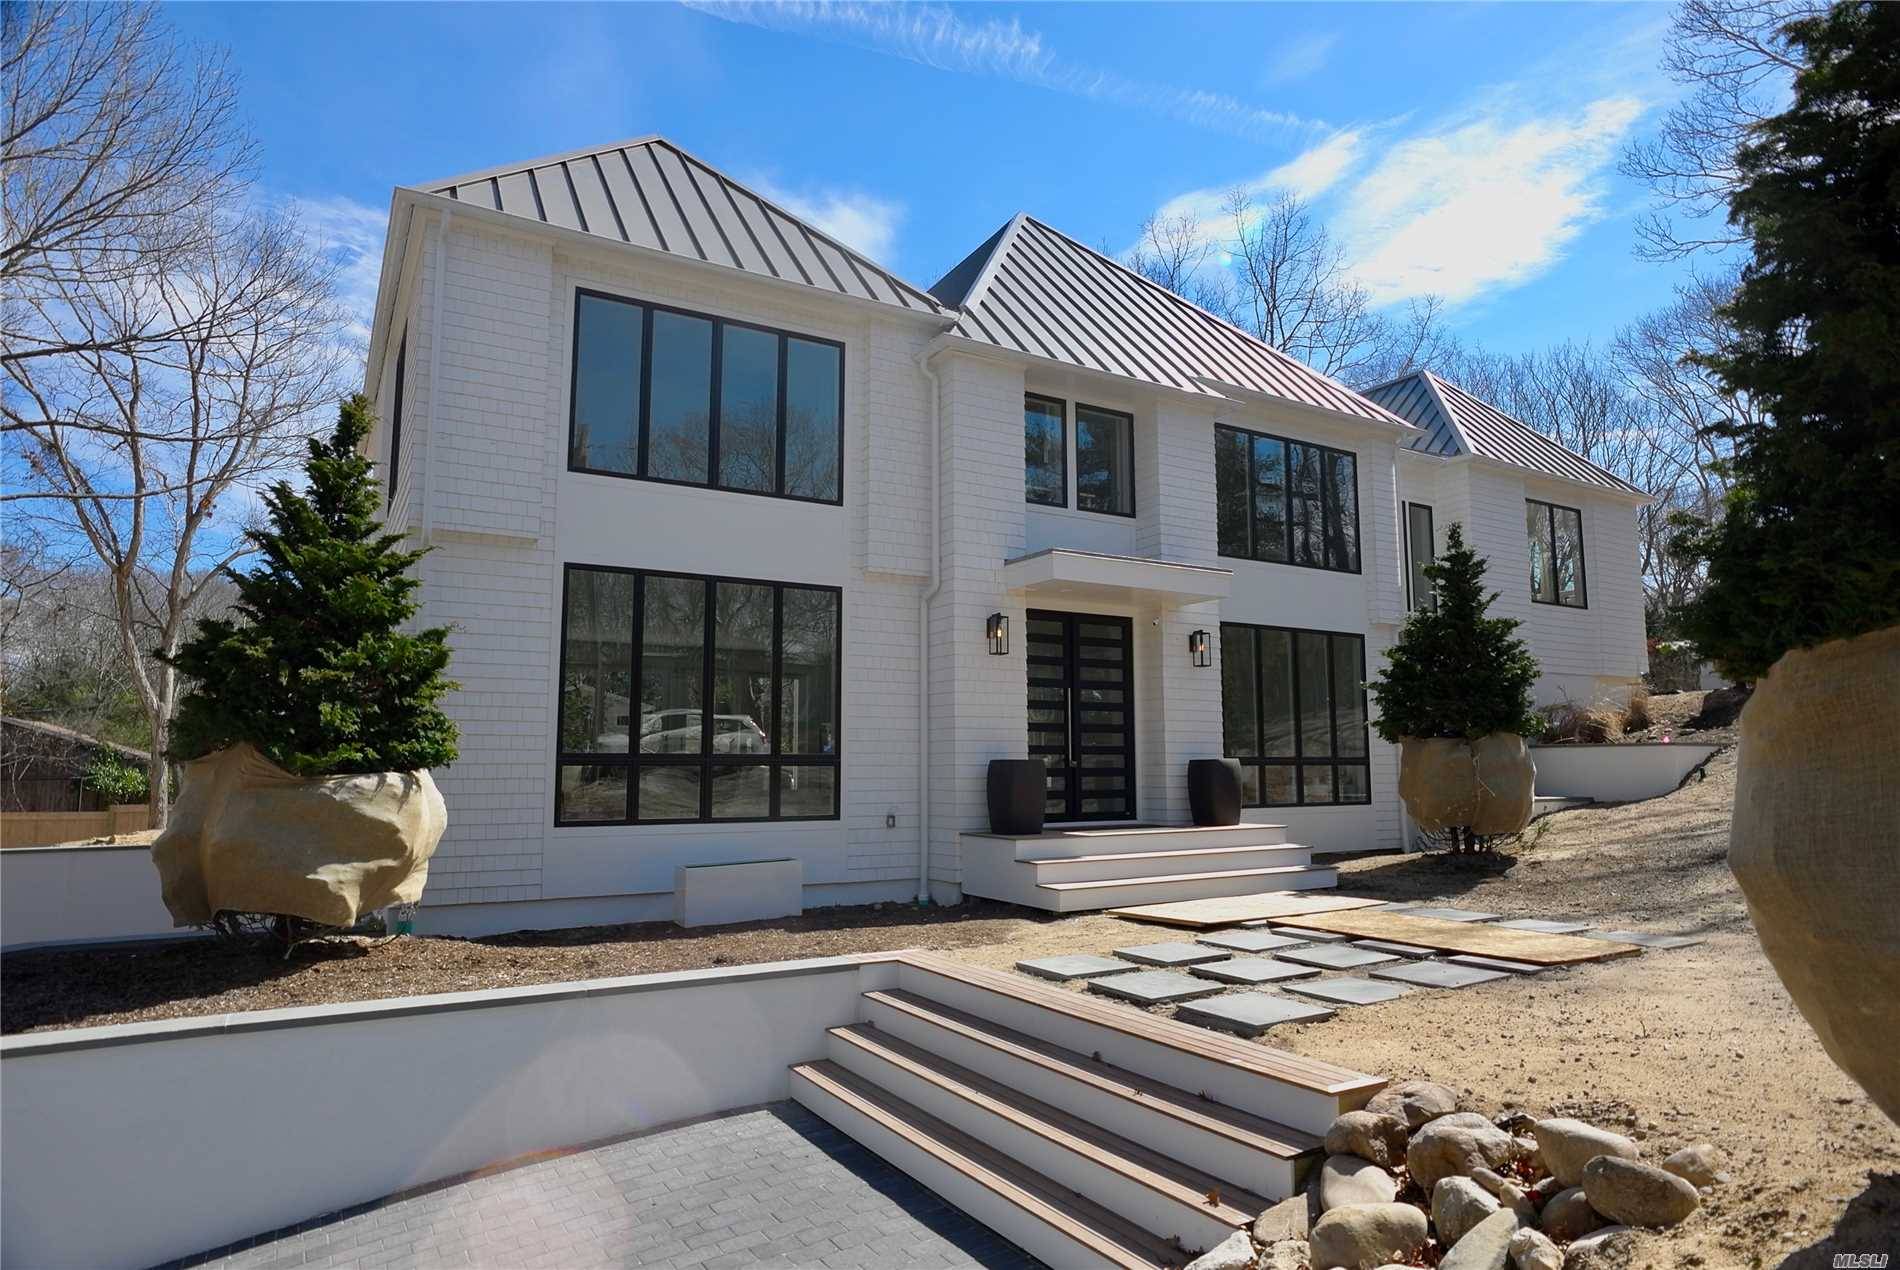 Situated in a private community within the Village of Sag Harbor, newly constructed 5 BR, 5.